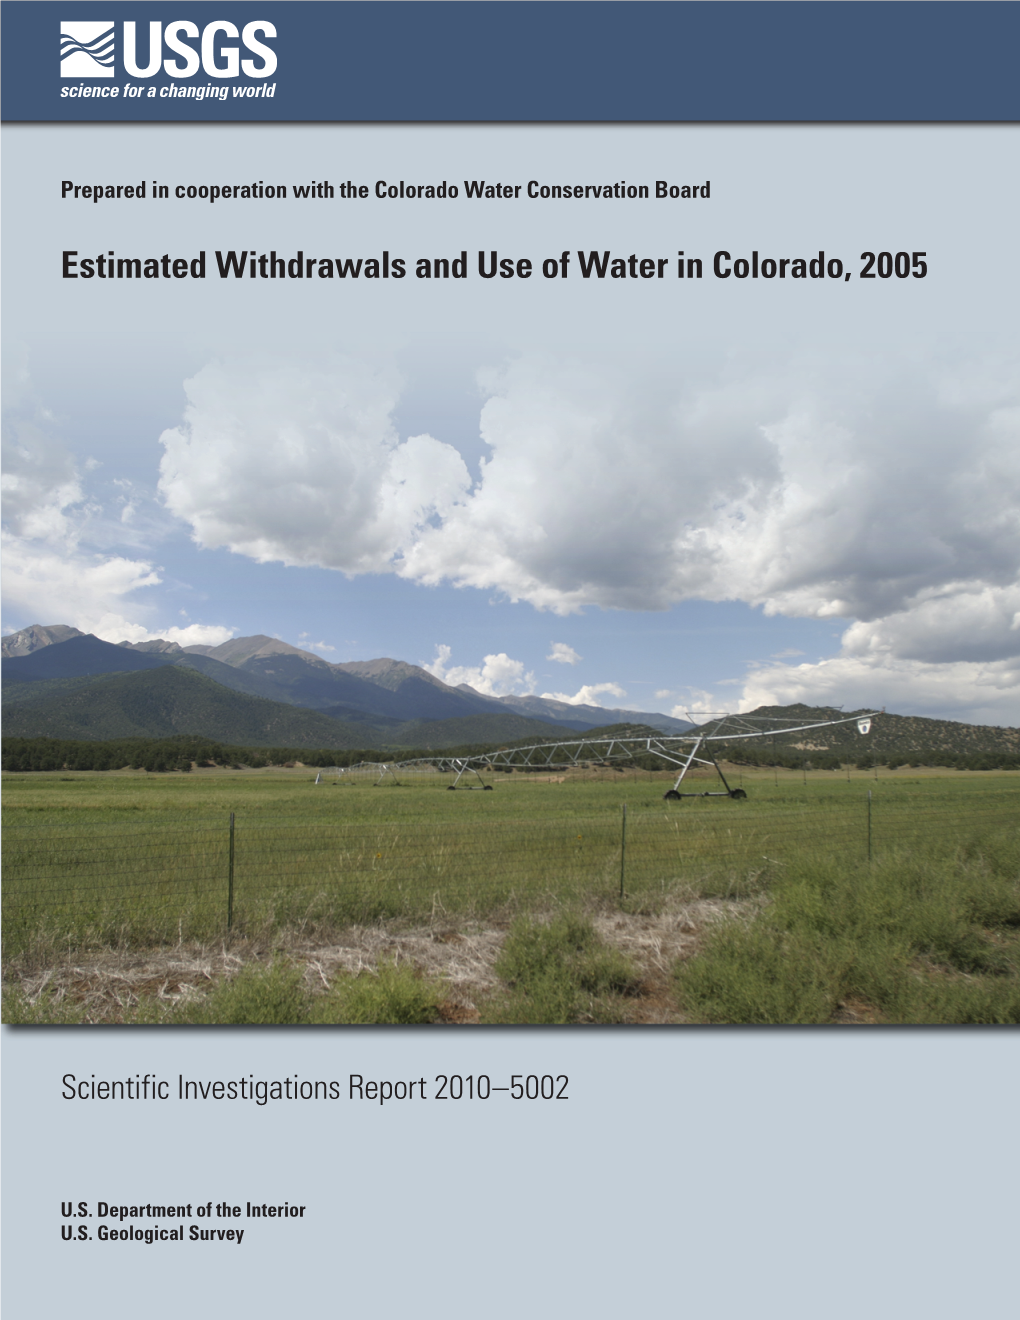 Estimated Withdrawals and Use of Water in Colorado, 2005